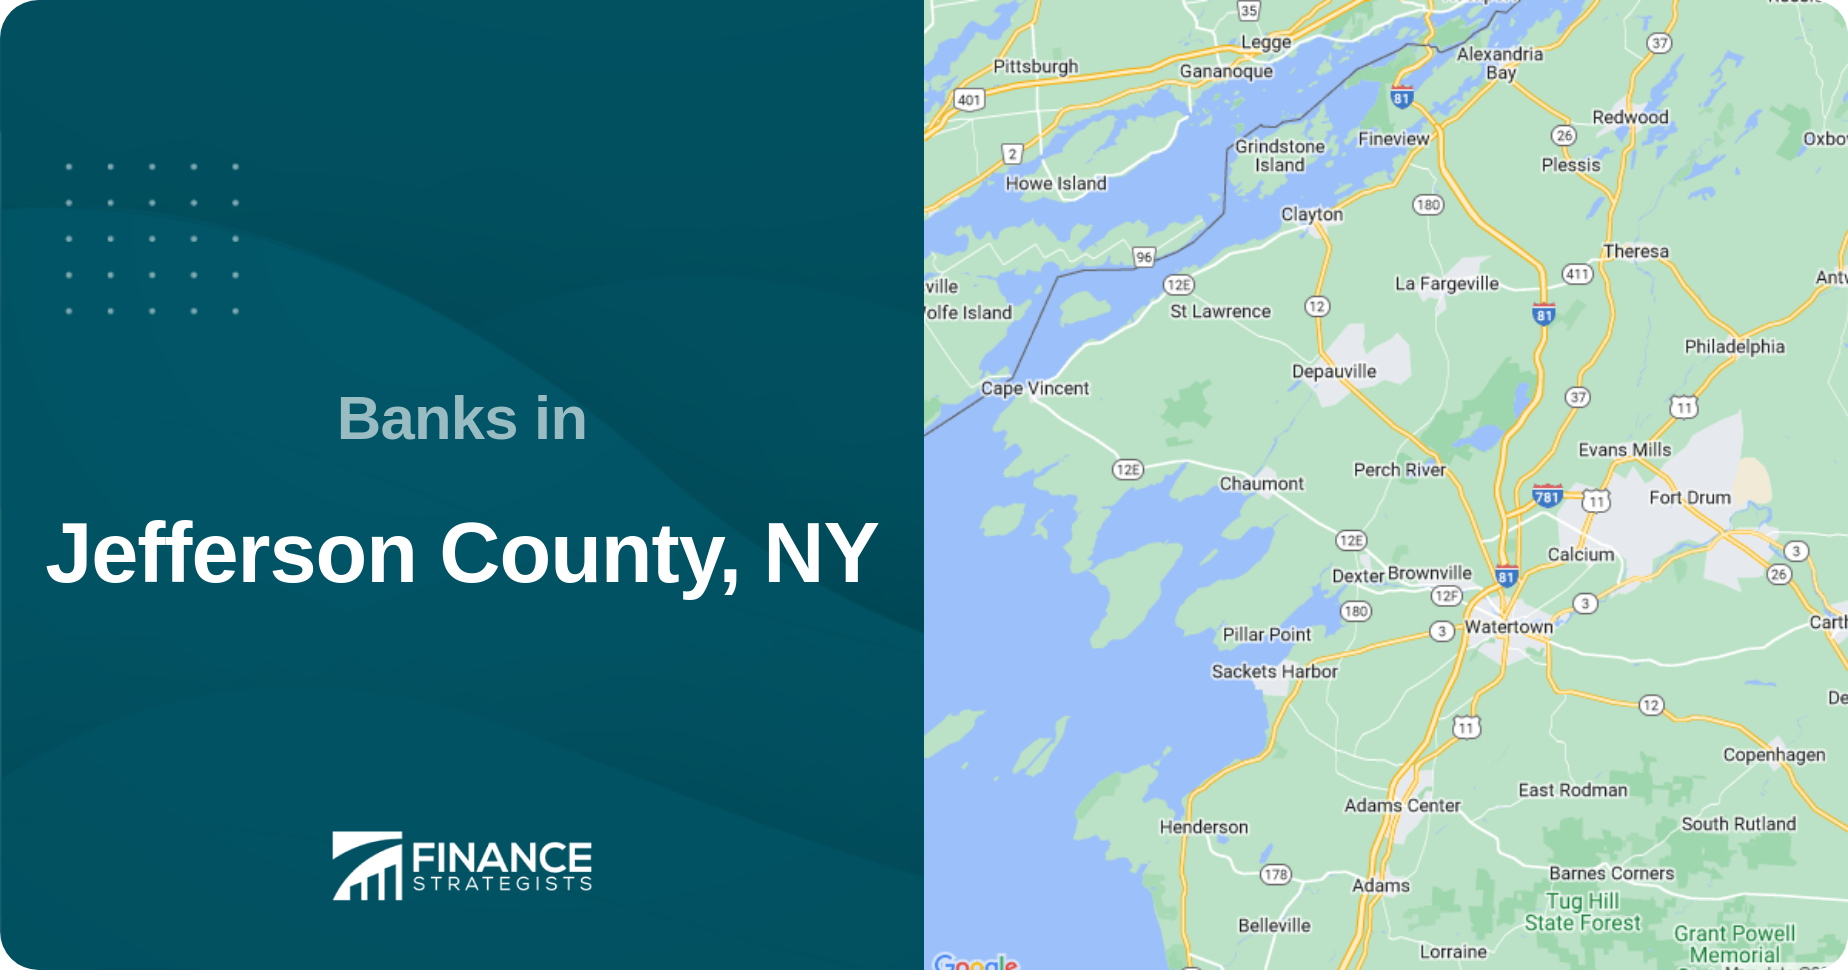 Banks in Jefferson County, NY